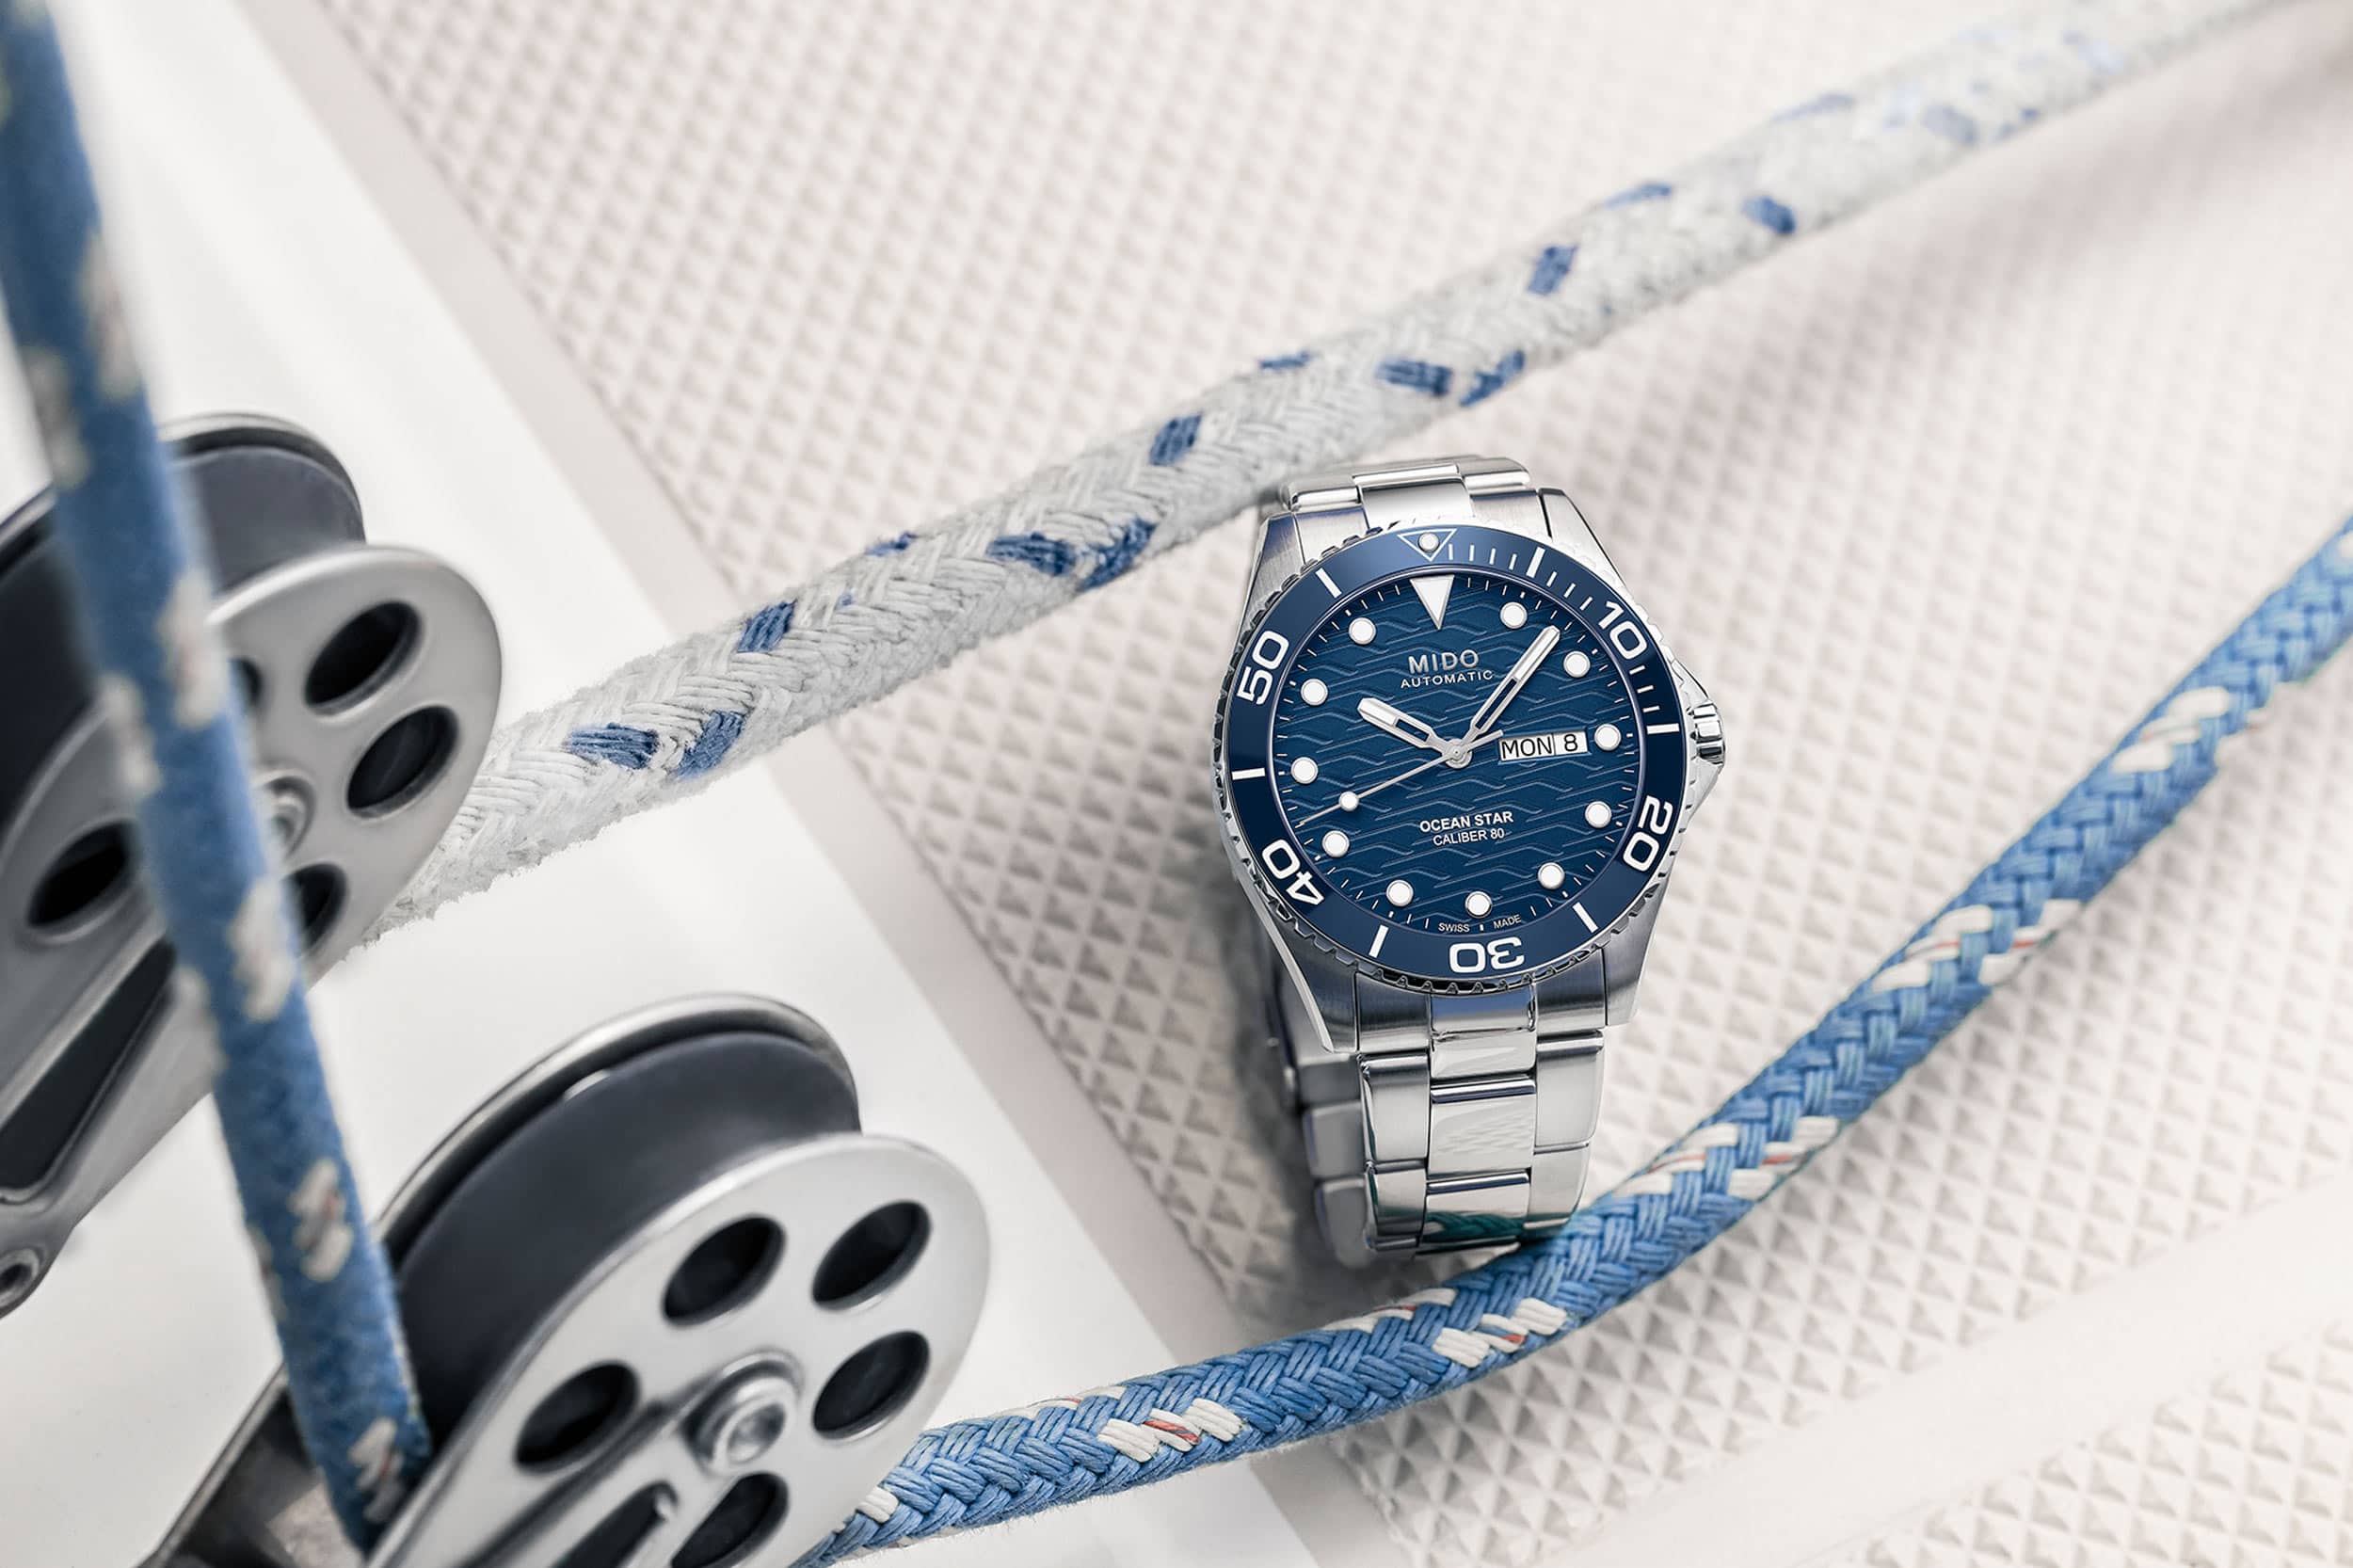 Mido Adds a Ceramic Bezel to the Ocean Star - Worn & Wound